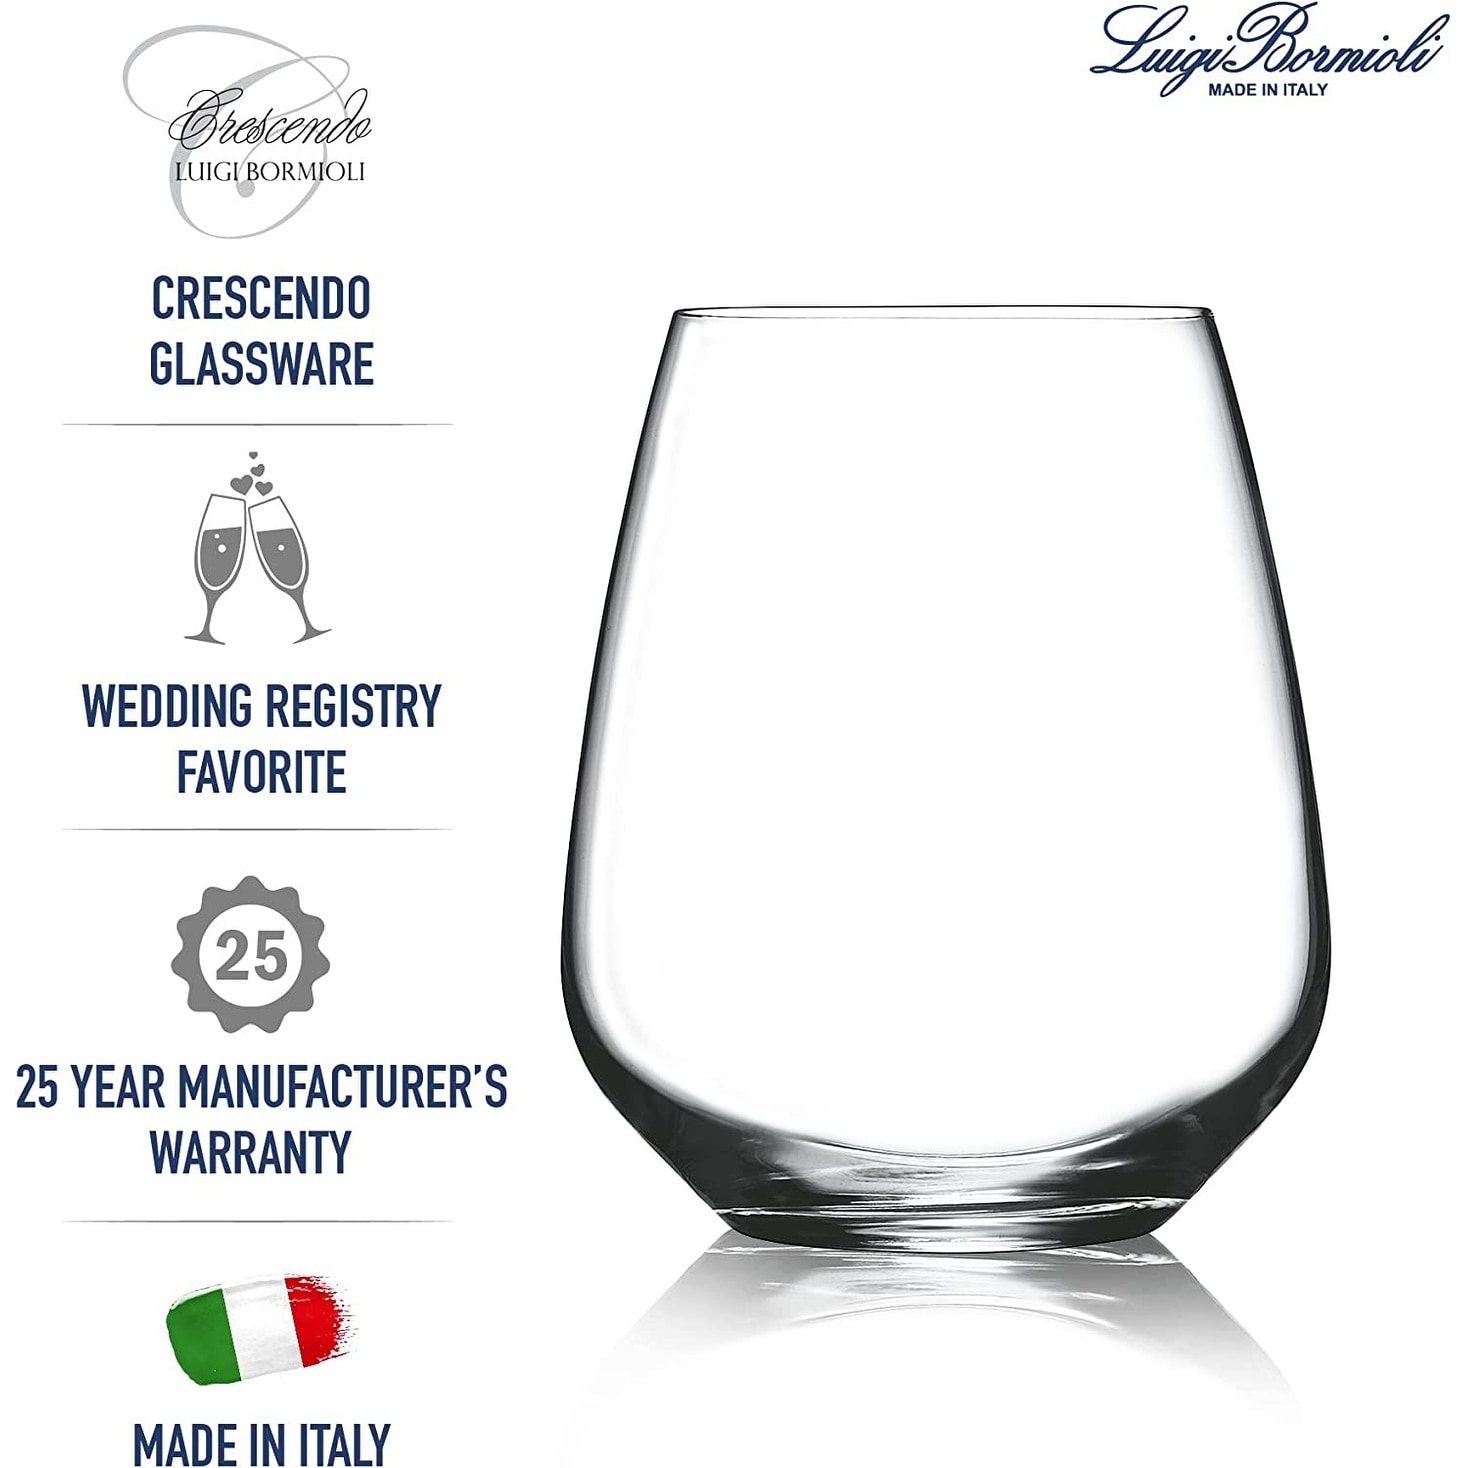 https://ak1.ostkcdn.com/images/products/is/images/direct/735c1836e25f2ac55250485858a10a40dbd65839/Luigi-Bormioli-Crescendo-Stemless-Drinking-Glass-Set-of-4.jpg